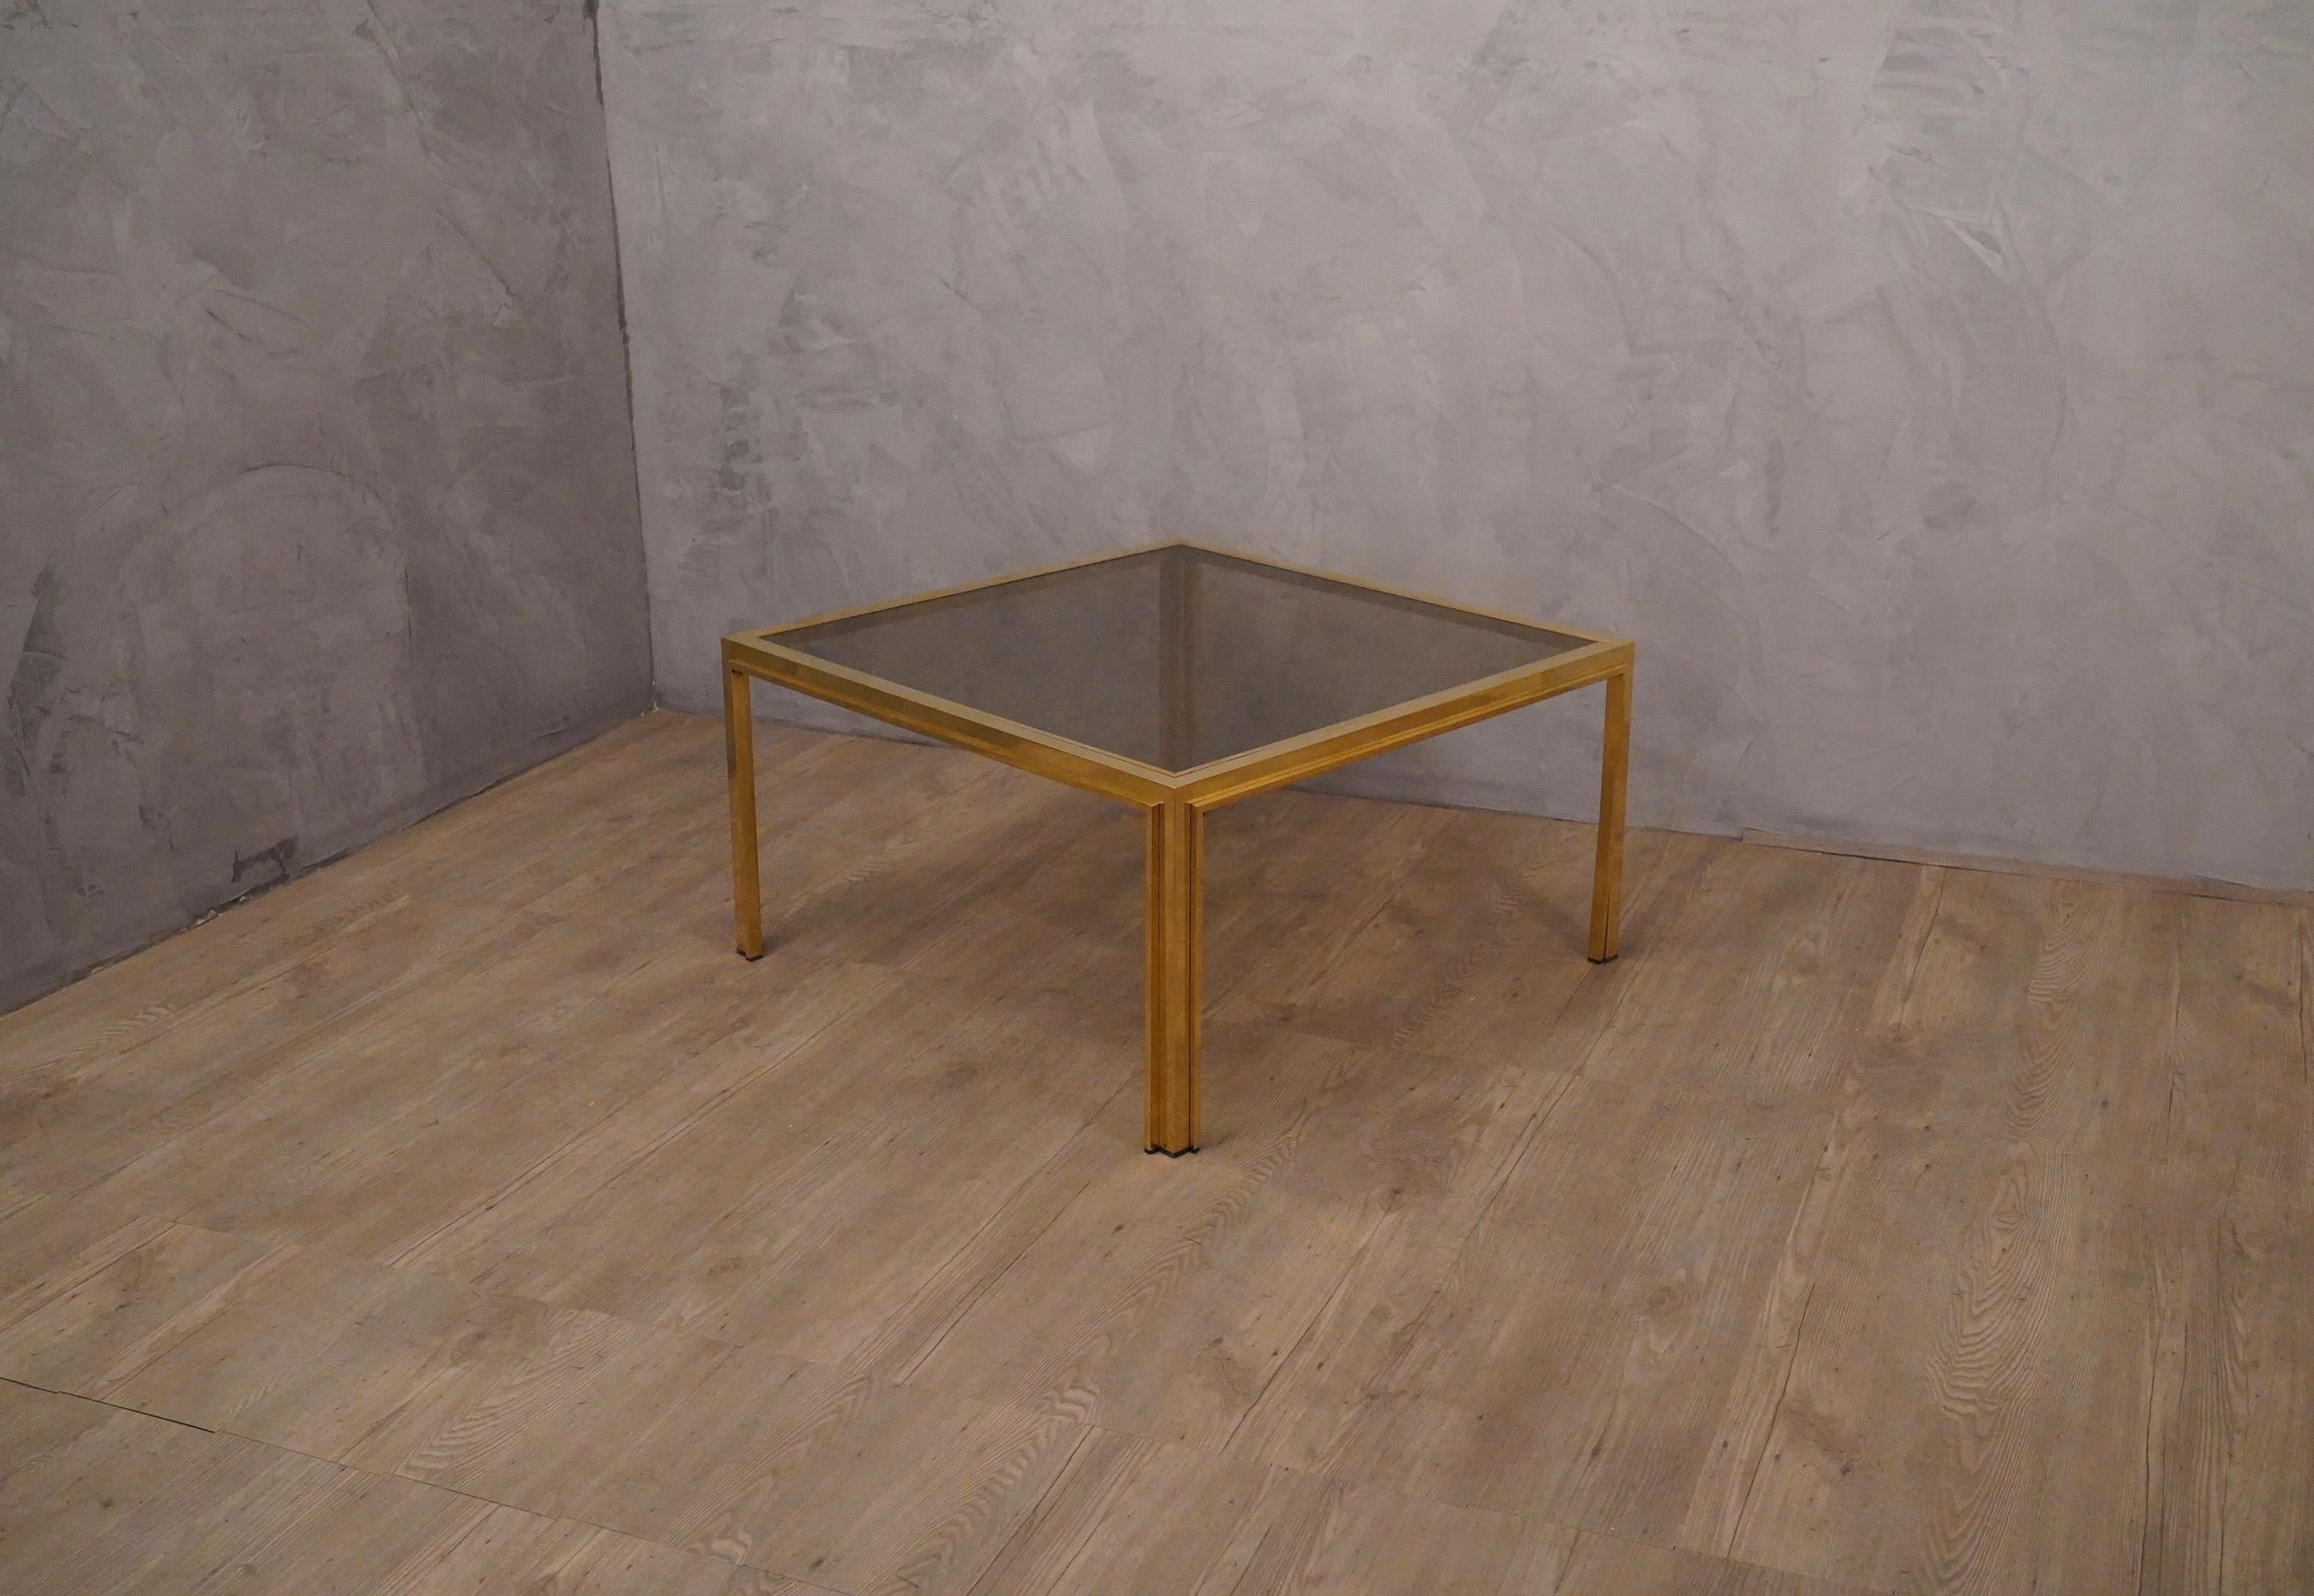 Romeo Rega Midcentury Square Brass and Glass Sofa Table, 1970 For Sale 5